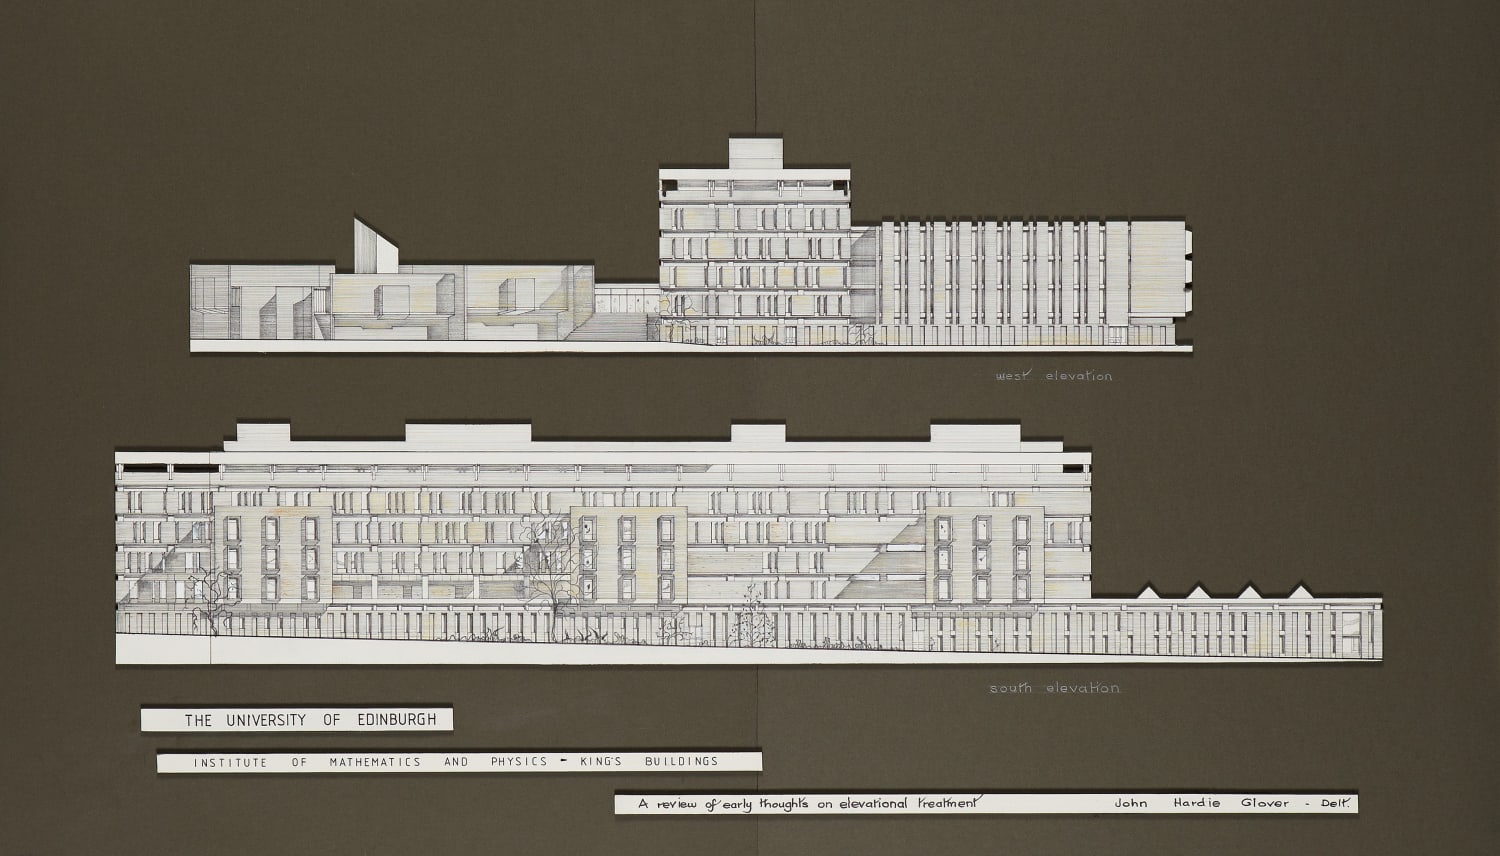 John Hardie Glover OBE RSA (1913-94), University of Edinburgh, Institute of Mathematics and Physics, Kings Buildings. A Review of early thoughts on Elevational Treatment [South and West Elevations]  Architectural drawing; pen and ink on paper, around 1965-66, 53.3 x 92.5 cm  RSA Diploma Collection (Deposited,1988) 1995.037